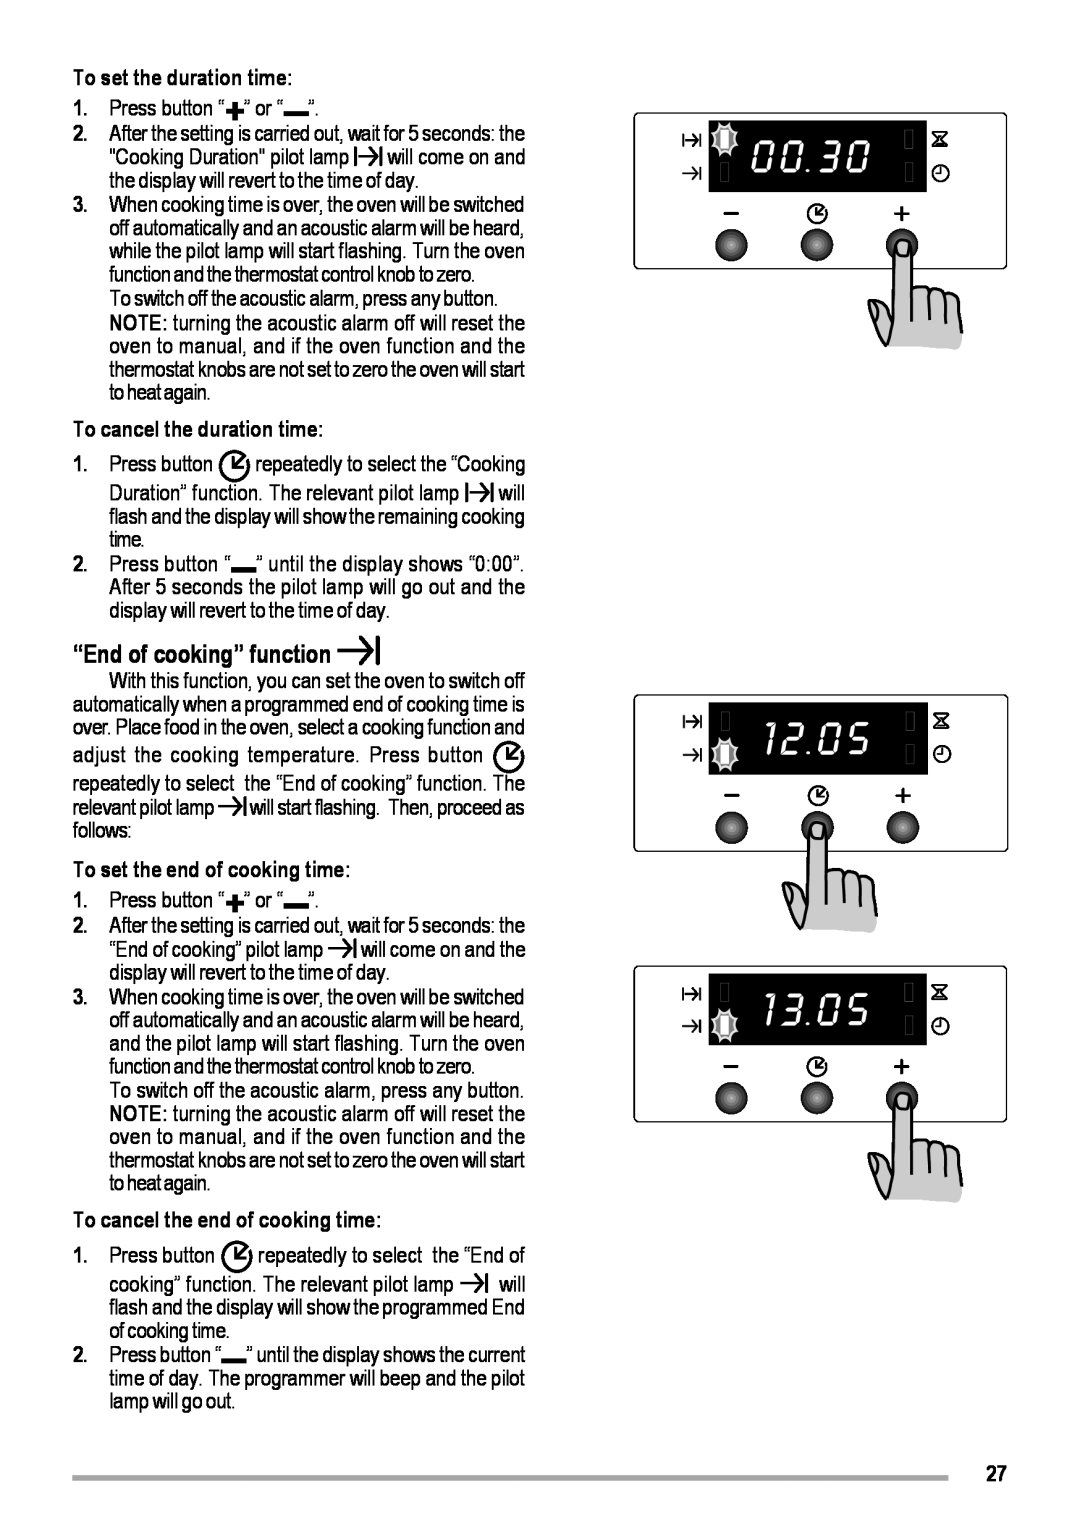 Zanussi ZOB 460 manual “End of cooking” function, To set the duration time, To cancel the duration time 